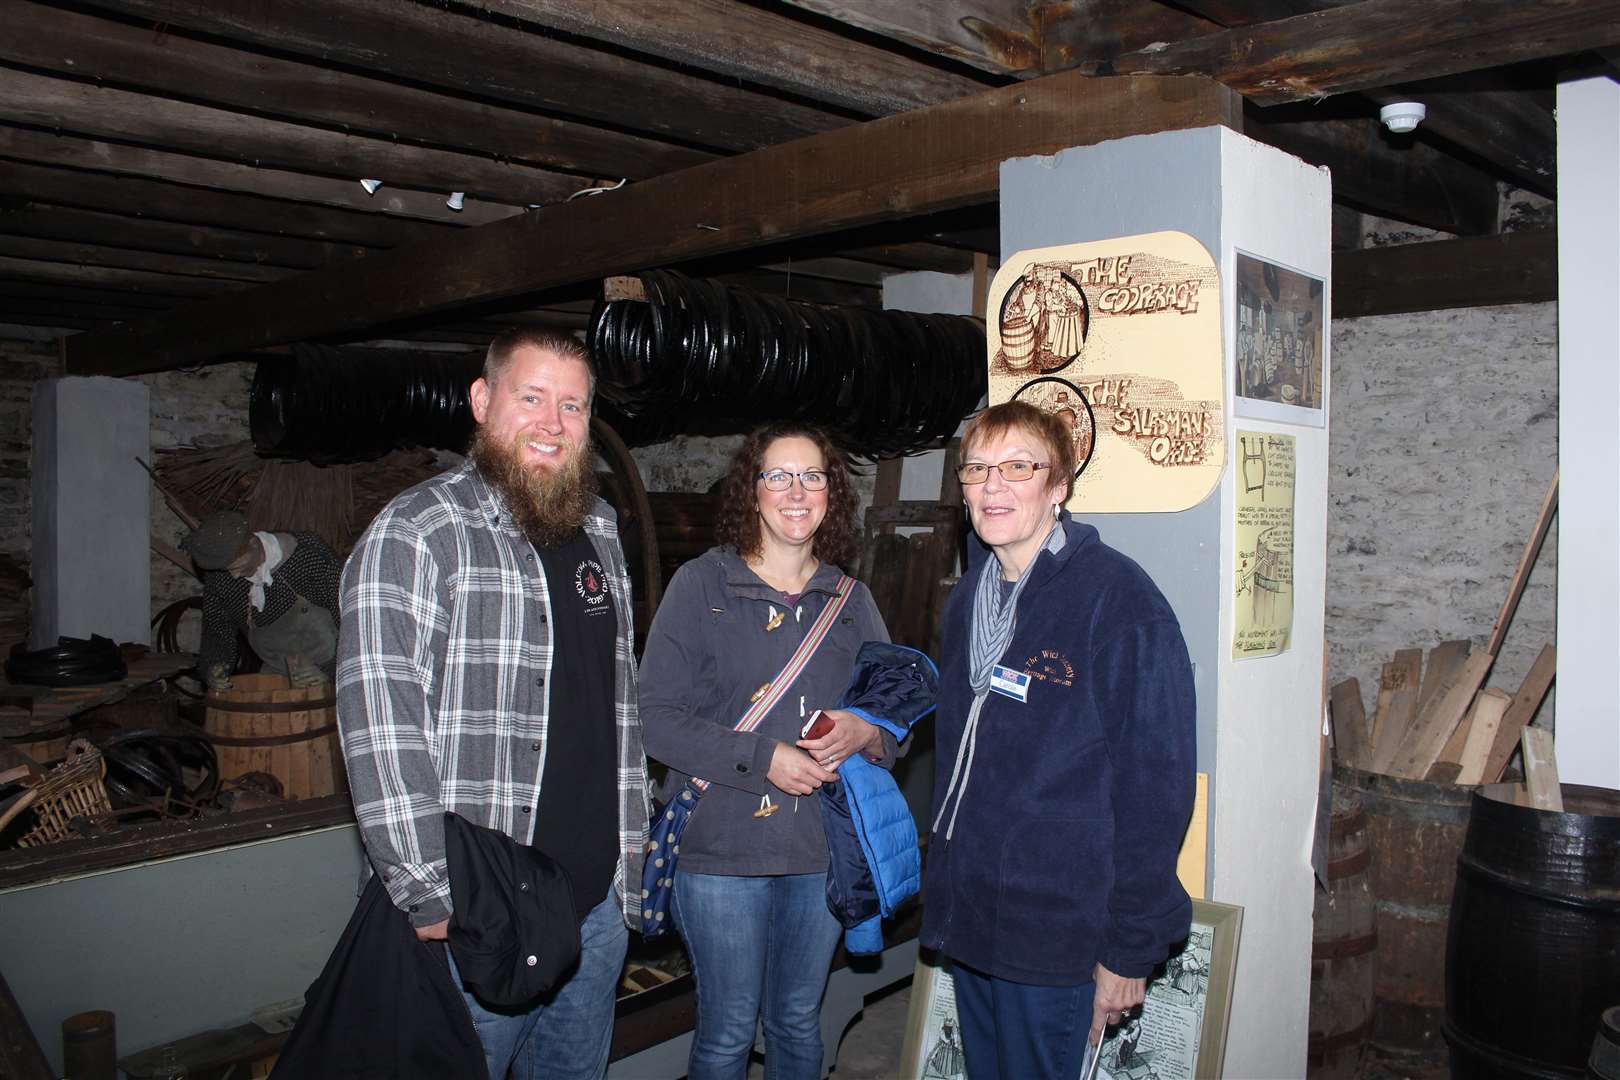 Volunteer Carole Sinclair showing visitors around the cooperage area during the museum's recent Doors Open Day event.